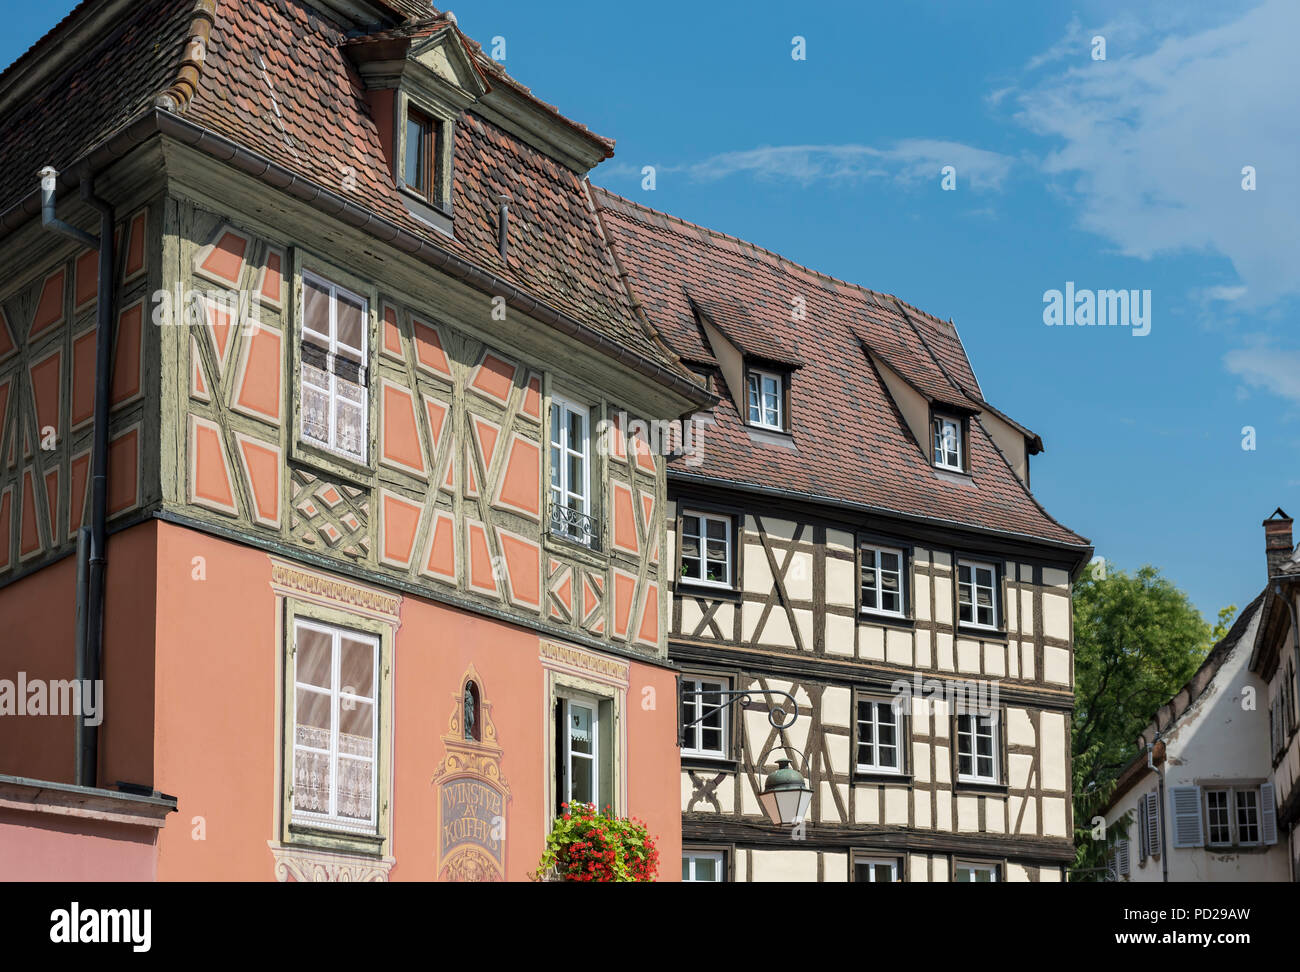 Timber-framed houses on Place de l'Ancienne Douane in Colmar, France Stock Photo